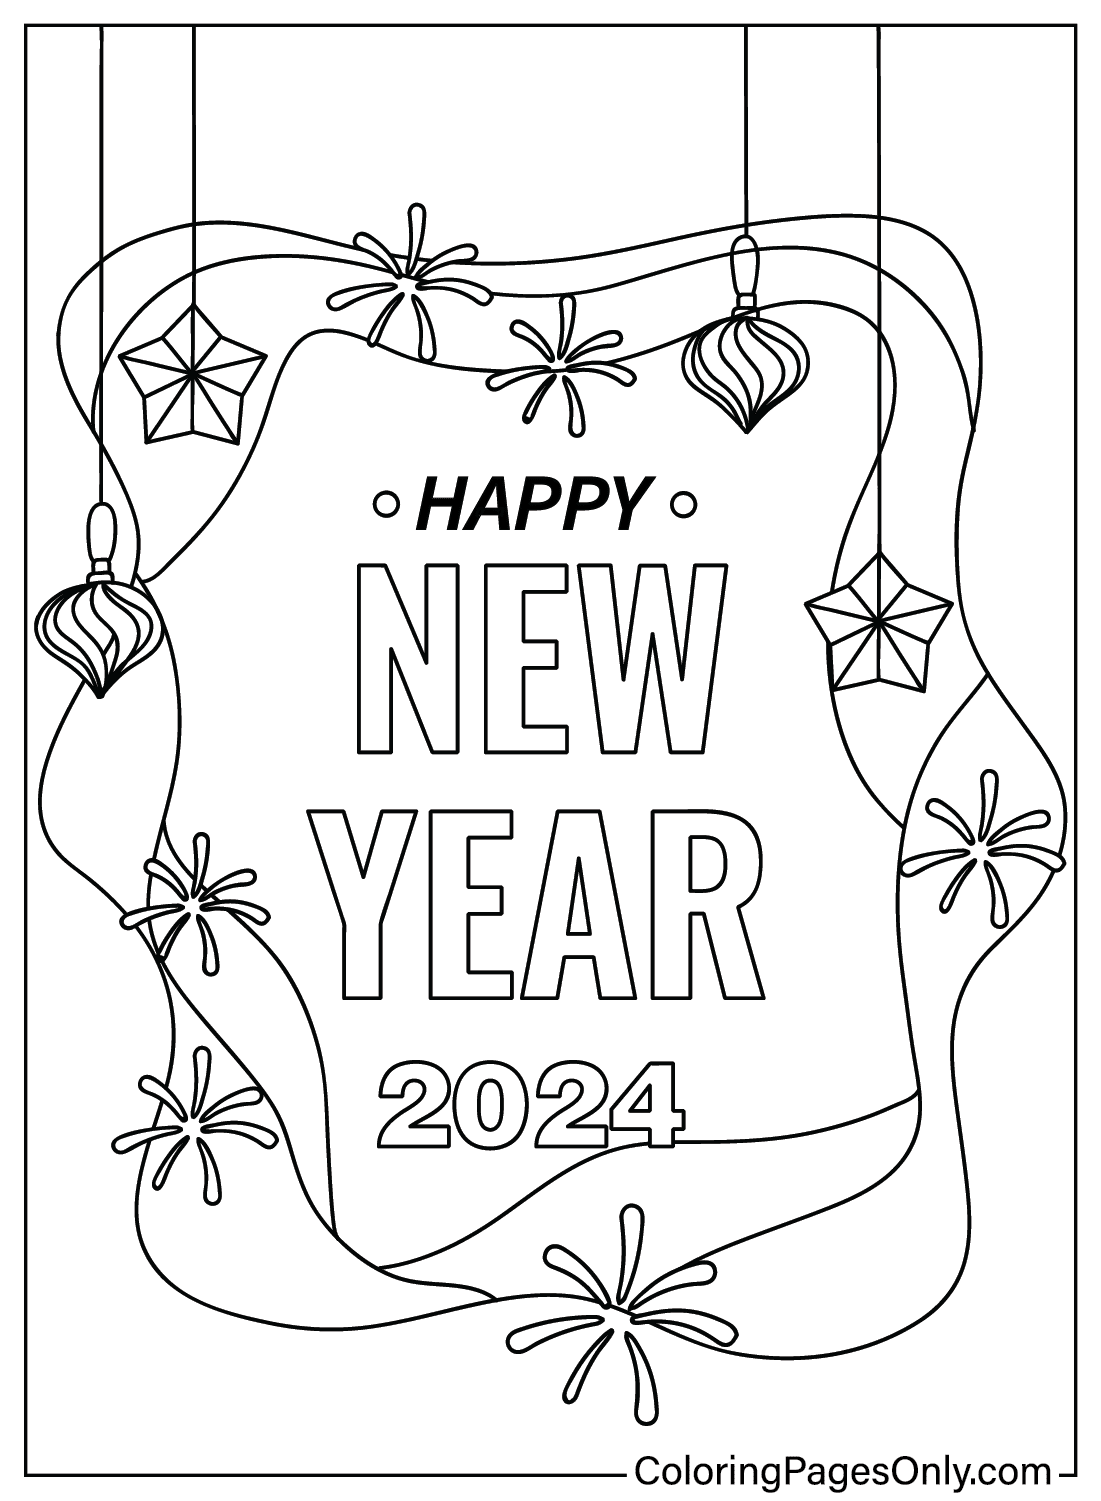 Free Happy New Year 2024 Coloring Page